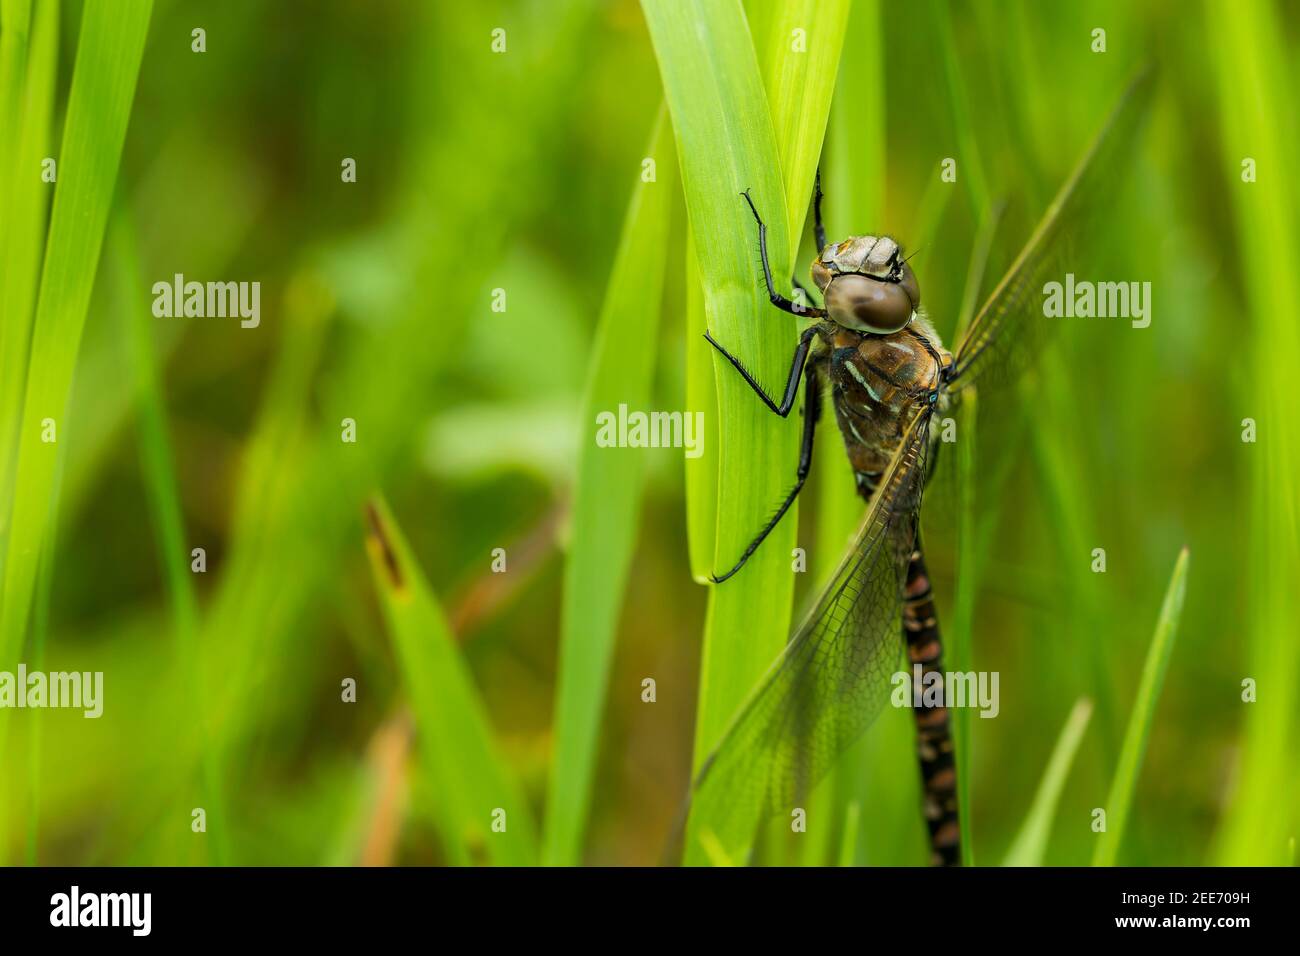 A Dragonfly (Anisoptera) resting on long grass during spring Stock Photo